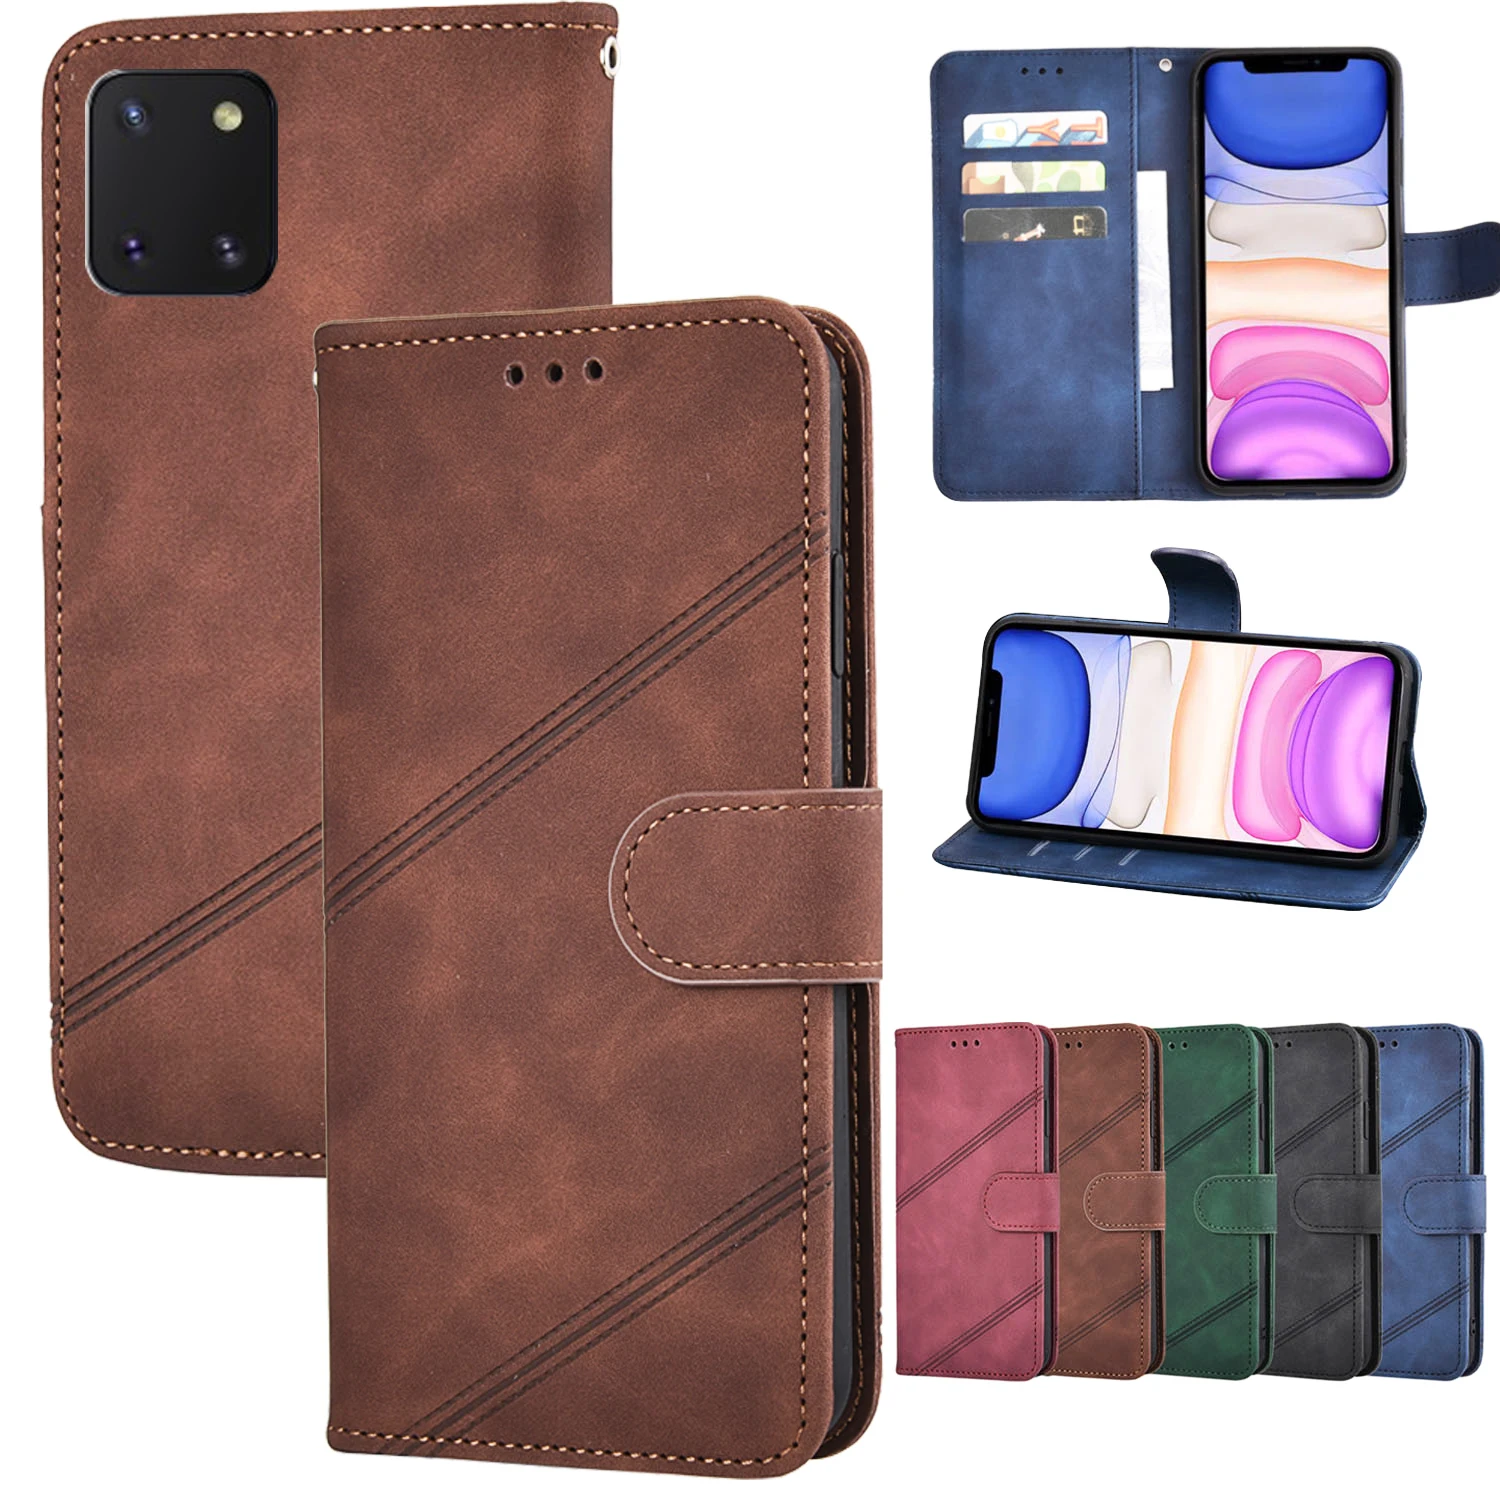 

Retro Wallet Leather Case For Samsung Galaxy S3 Neo Duos S4 S5 Neo S6 Edge S7 Edge S8 S9 Plus ON5 ON7 2016 C5 C7 C9 Pro Cover